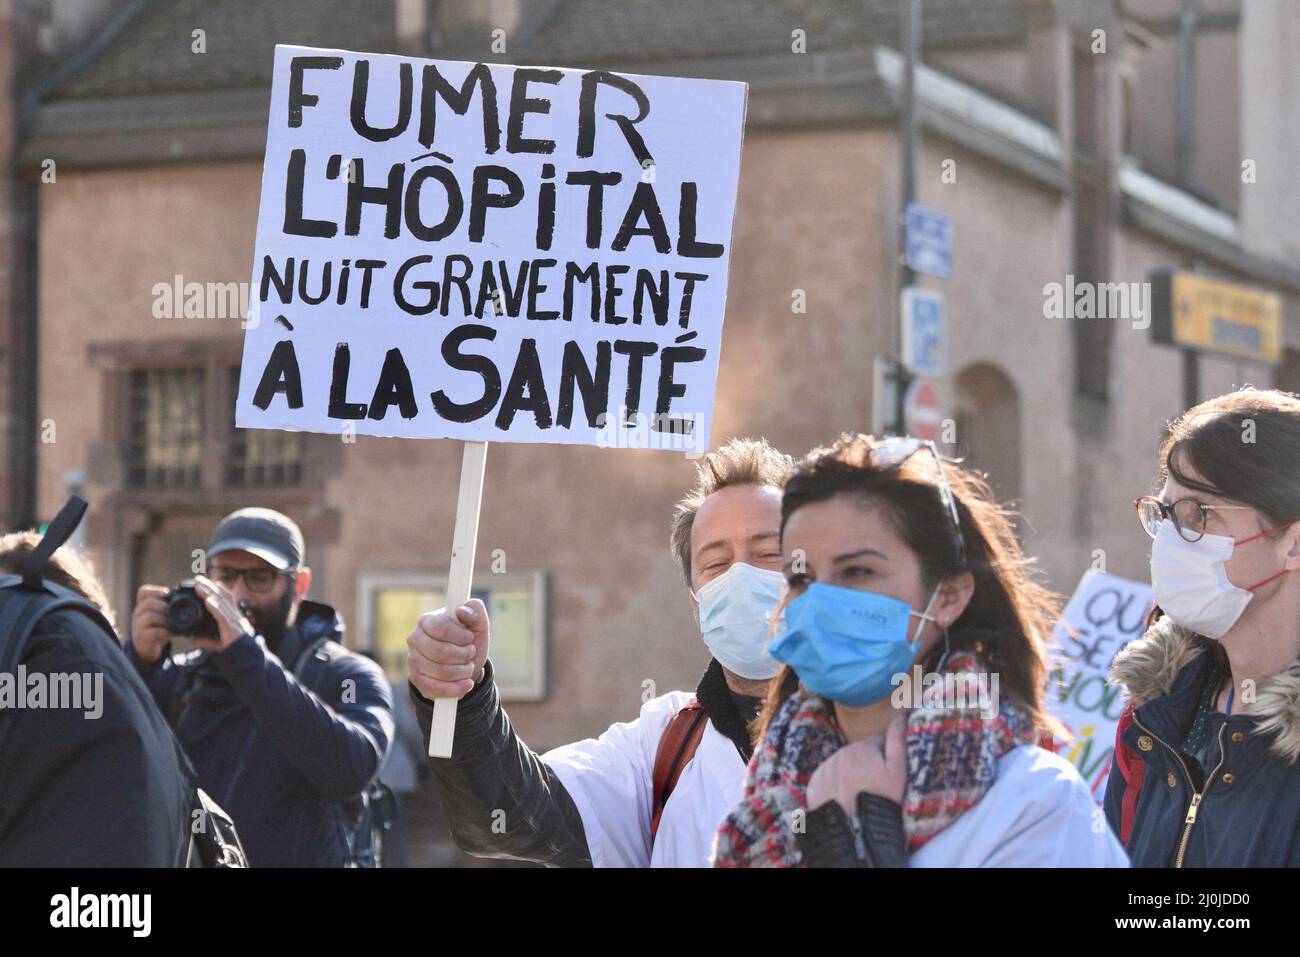 March for Health, health workers demonstrate to denounce the lack of staff in the services and the constant problems in the public hospital. The Segur of Health is criticized, the changes are not sufficient, and the debt of the hospitals is constantly increasing. March 19, 2022, in Strasbourg Northeastern France. Photo by Nicolas Roses/ABACAPRESS.COM Stock Photo